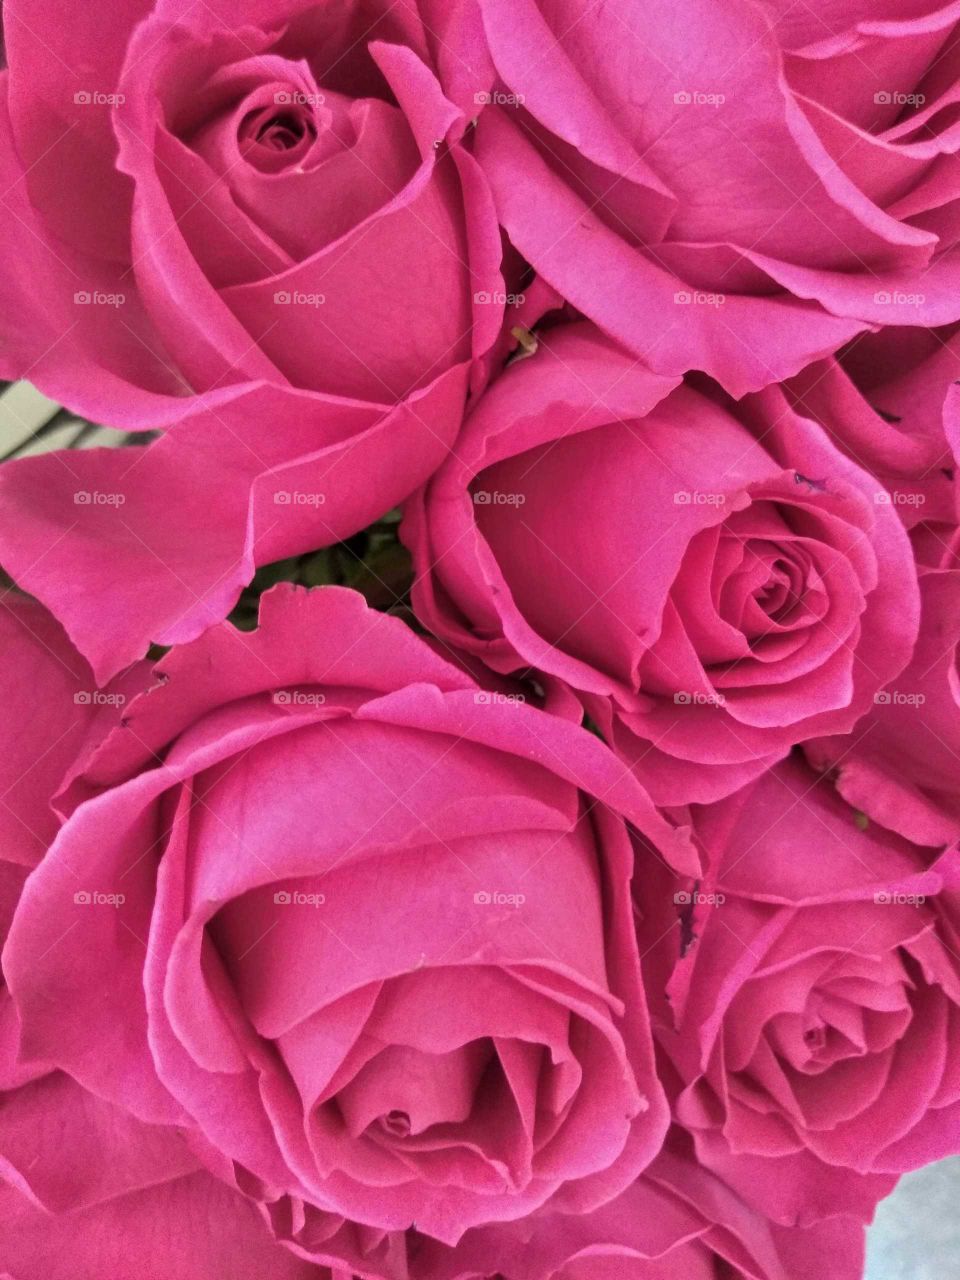 beautiful pink roses ready to bloom